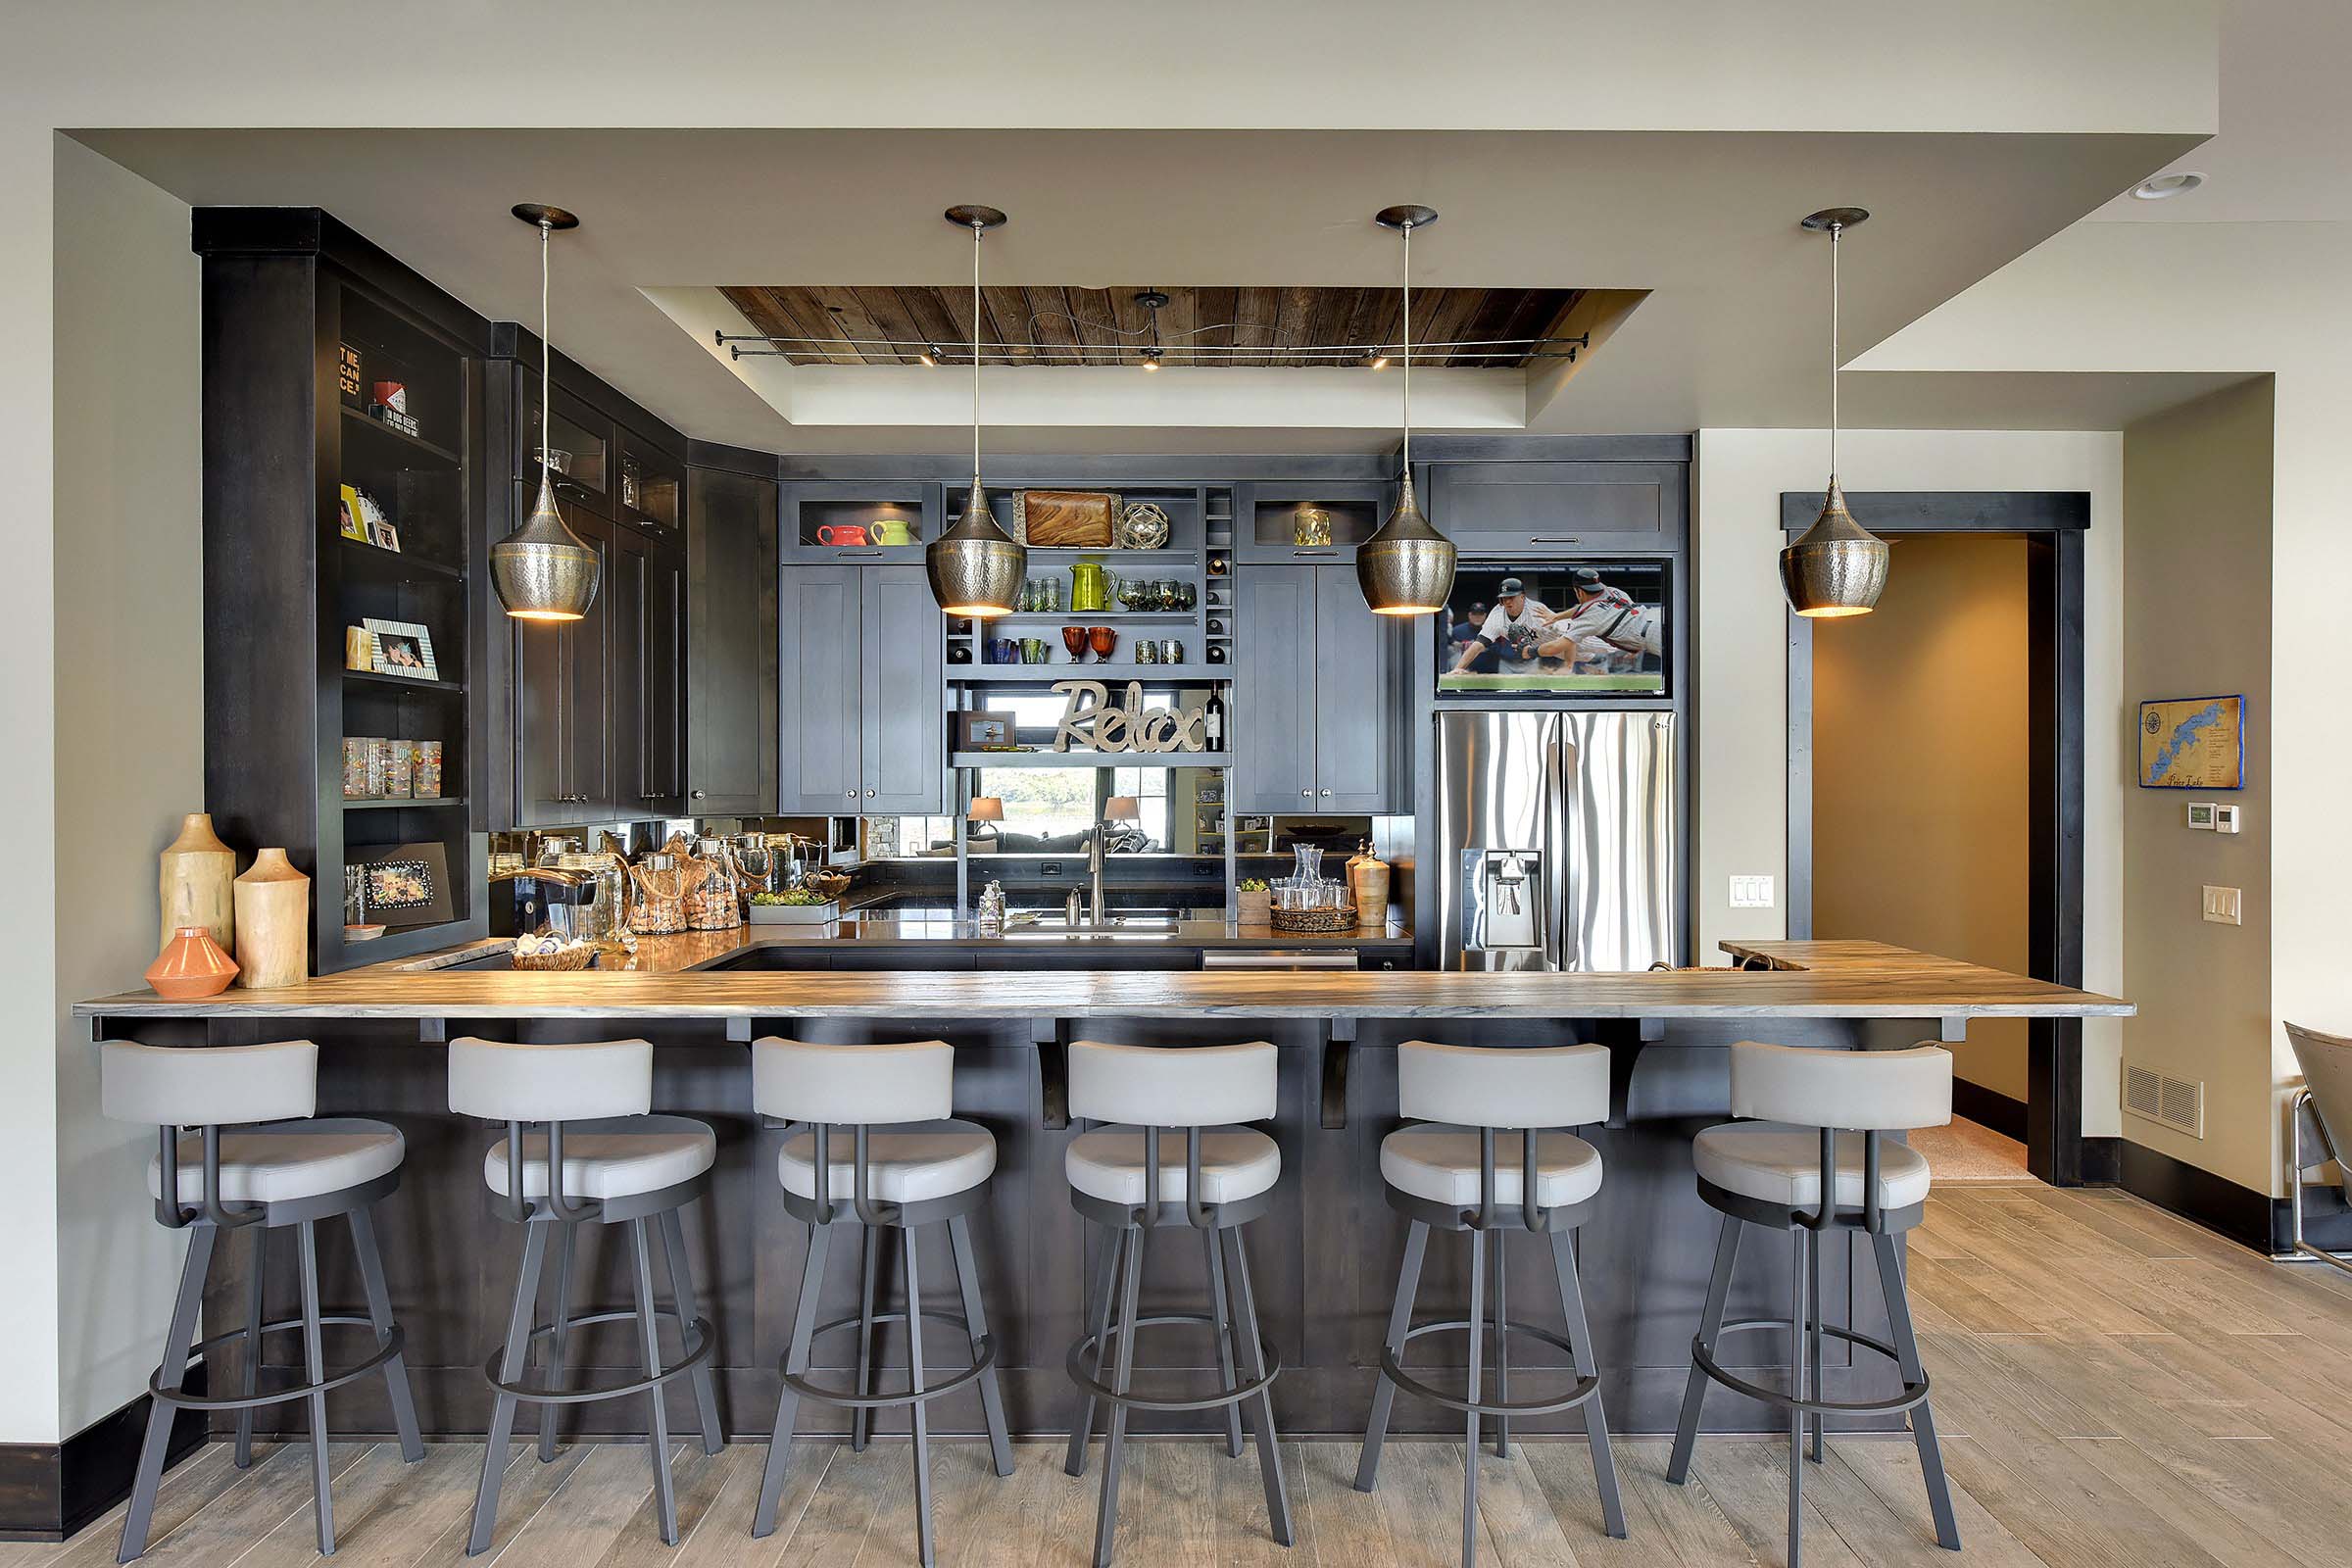 A kitchen with a bar and stools.